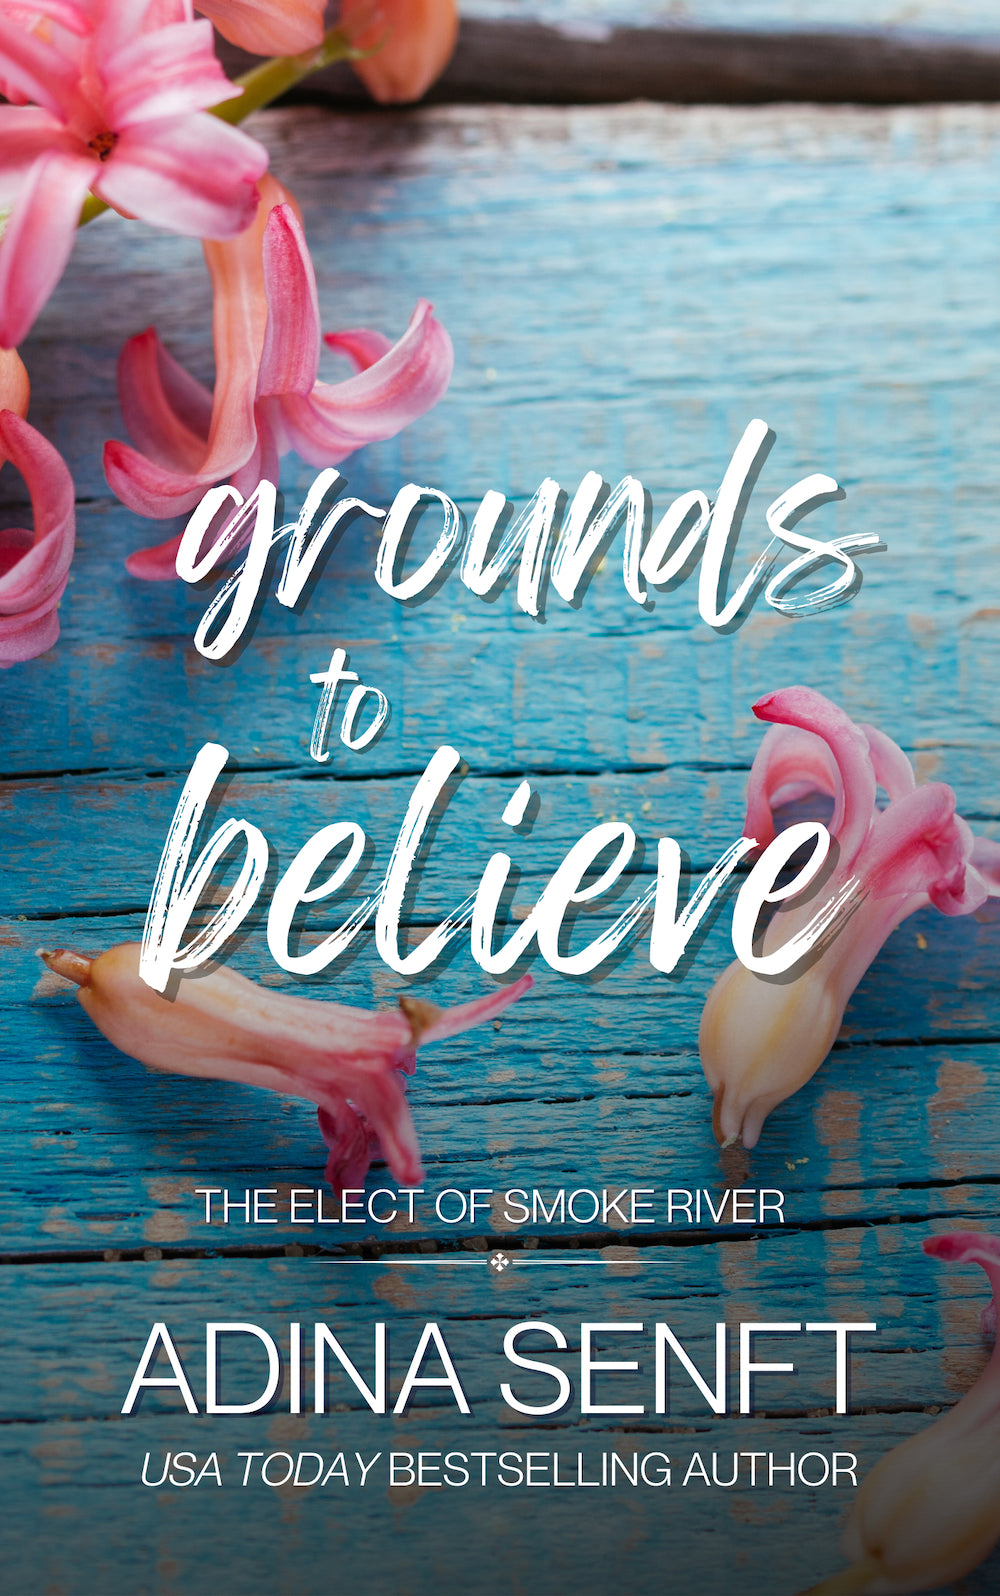 Grounds to Believe: The Elect of Smoke River by Adina Senft